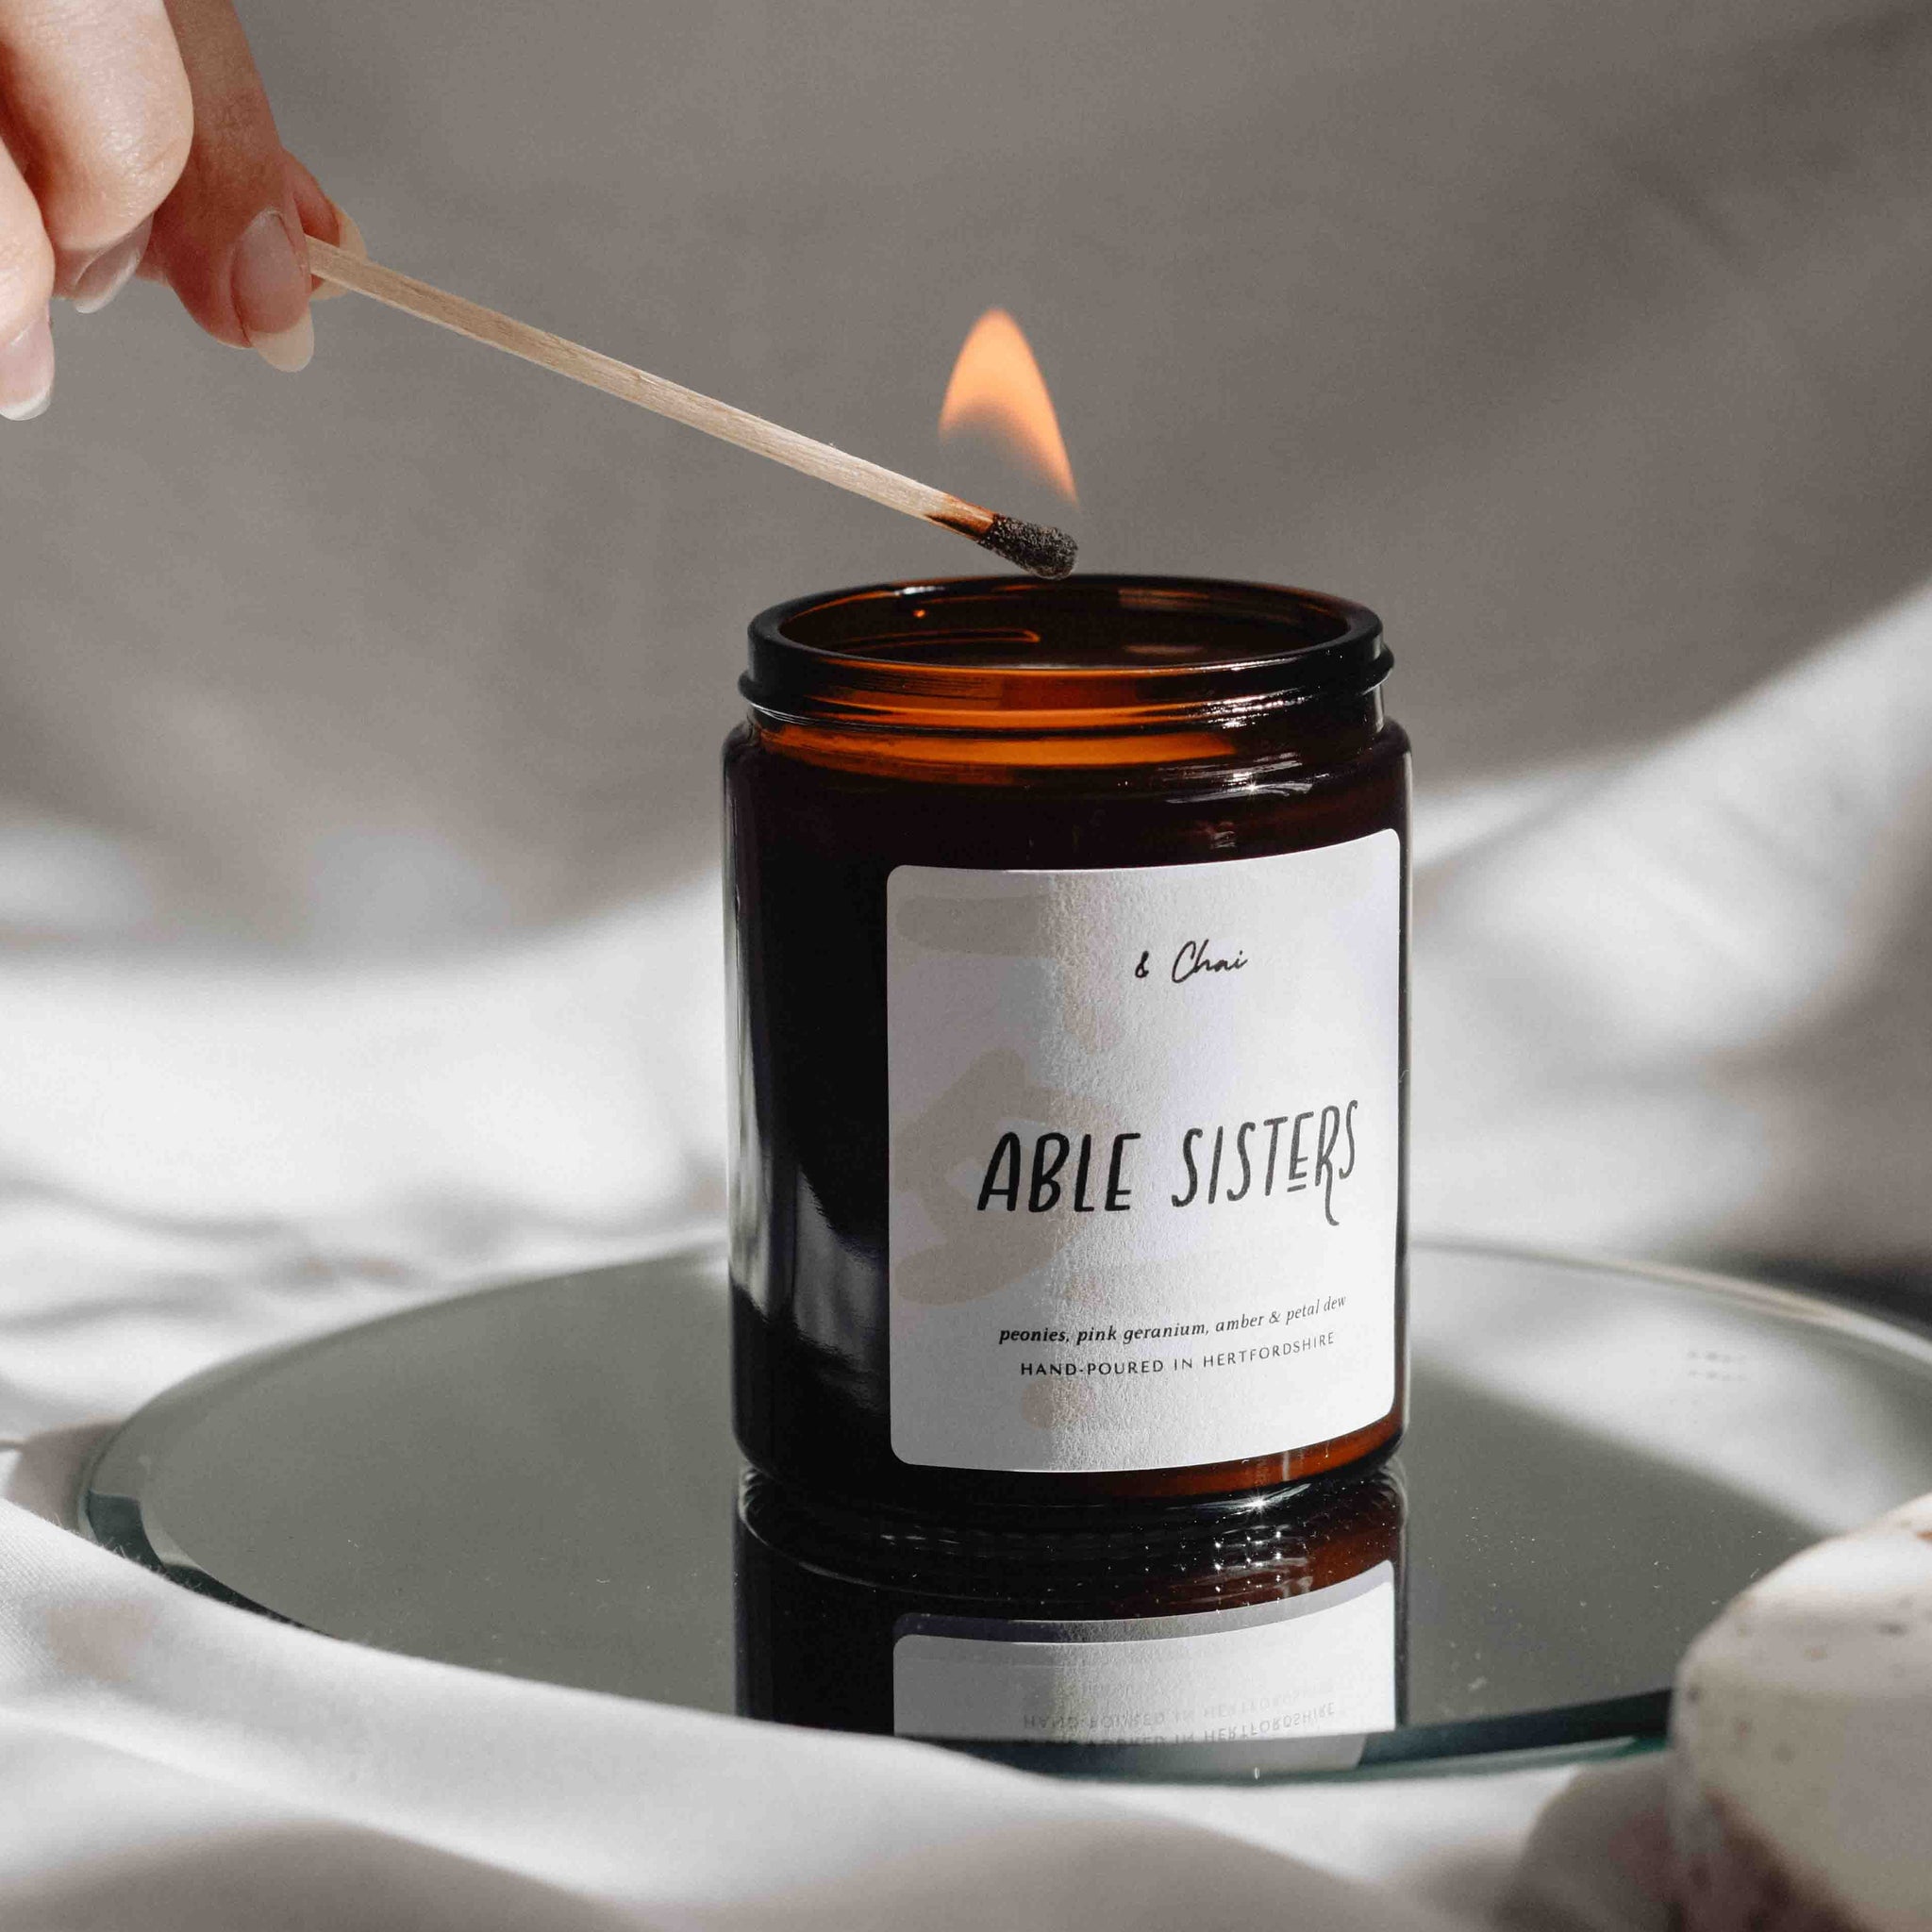 Able Sisters Soy Candle